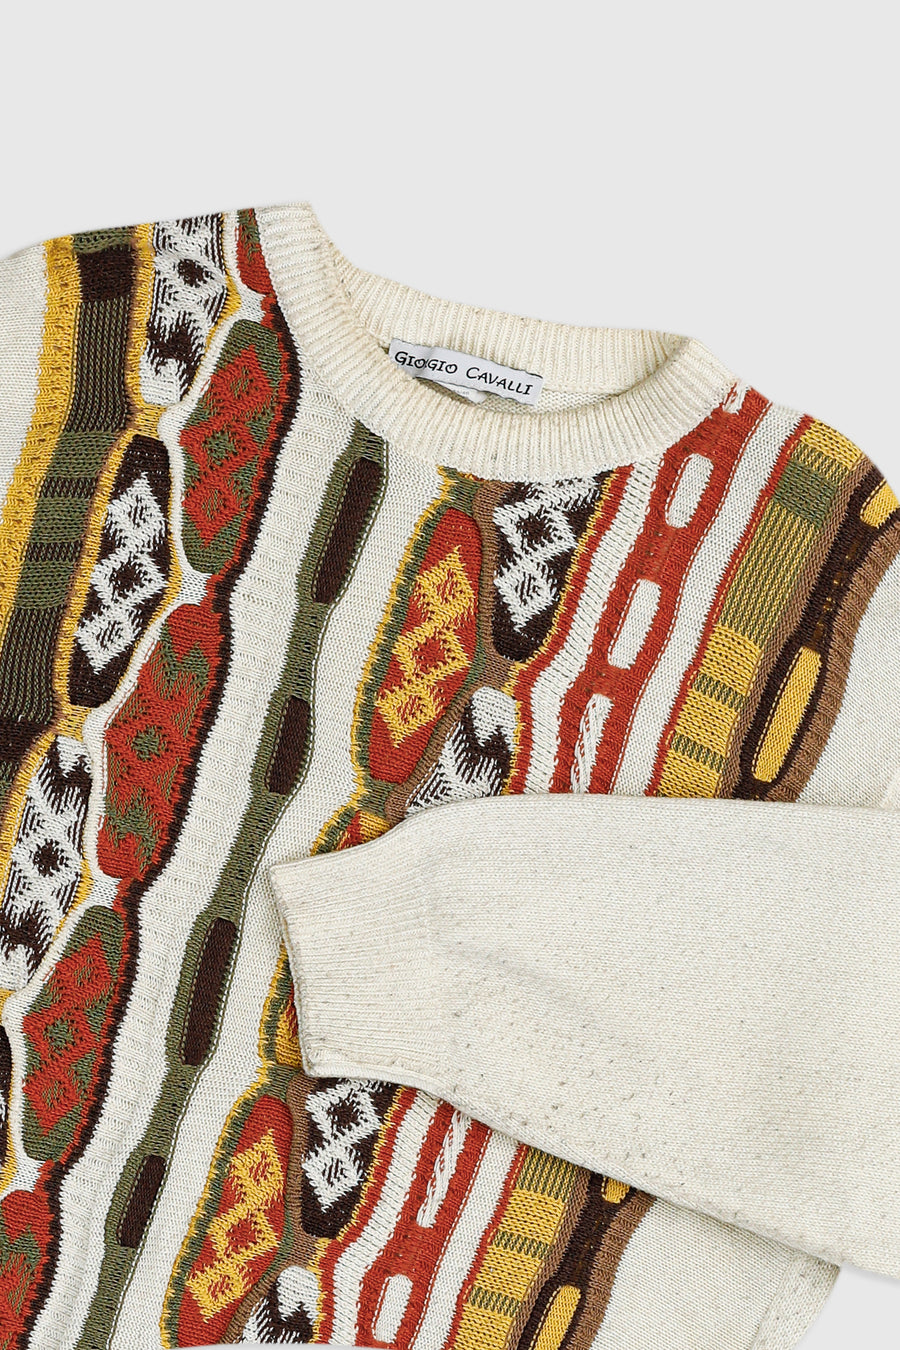 Vintage Coogi Style Knit Sweater - M